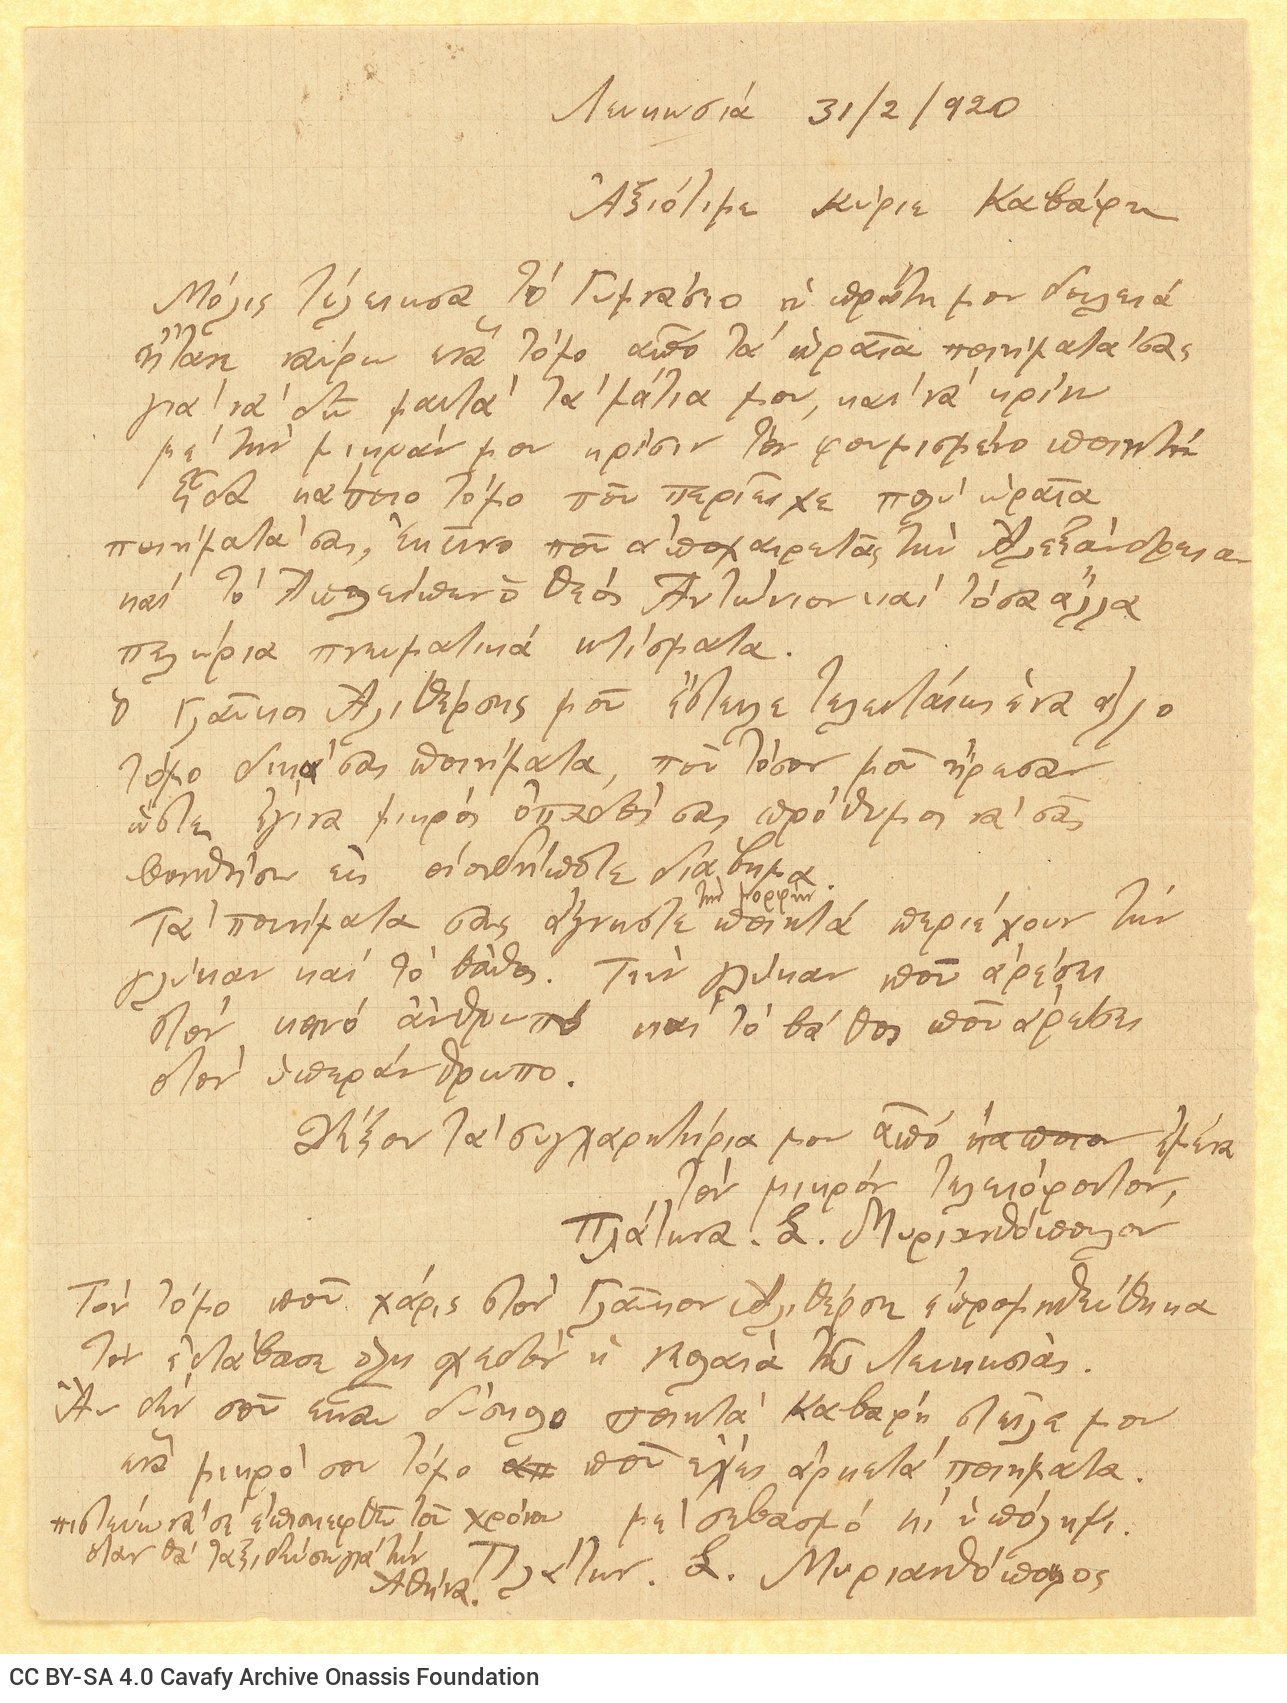 Handwritten letter by Platon S. Myrianthopoulos to Cavafy, in which he expresses his admiration for the poet's work and asks 